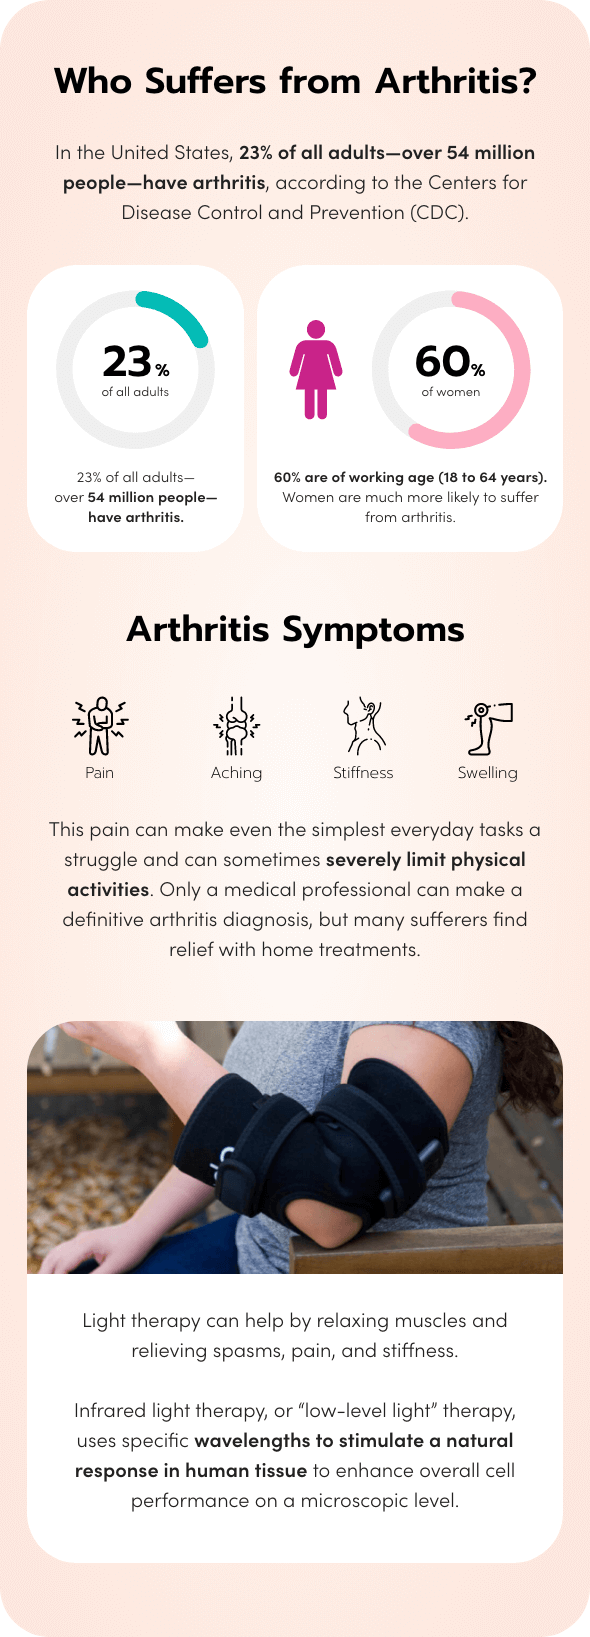 How Does Infrared Help Arthritis Pain?